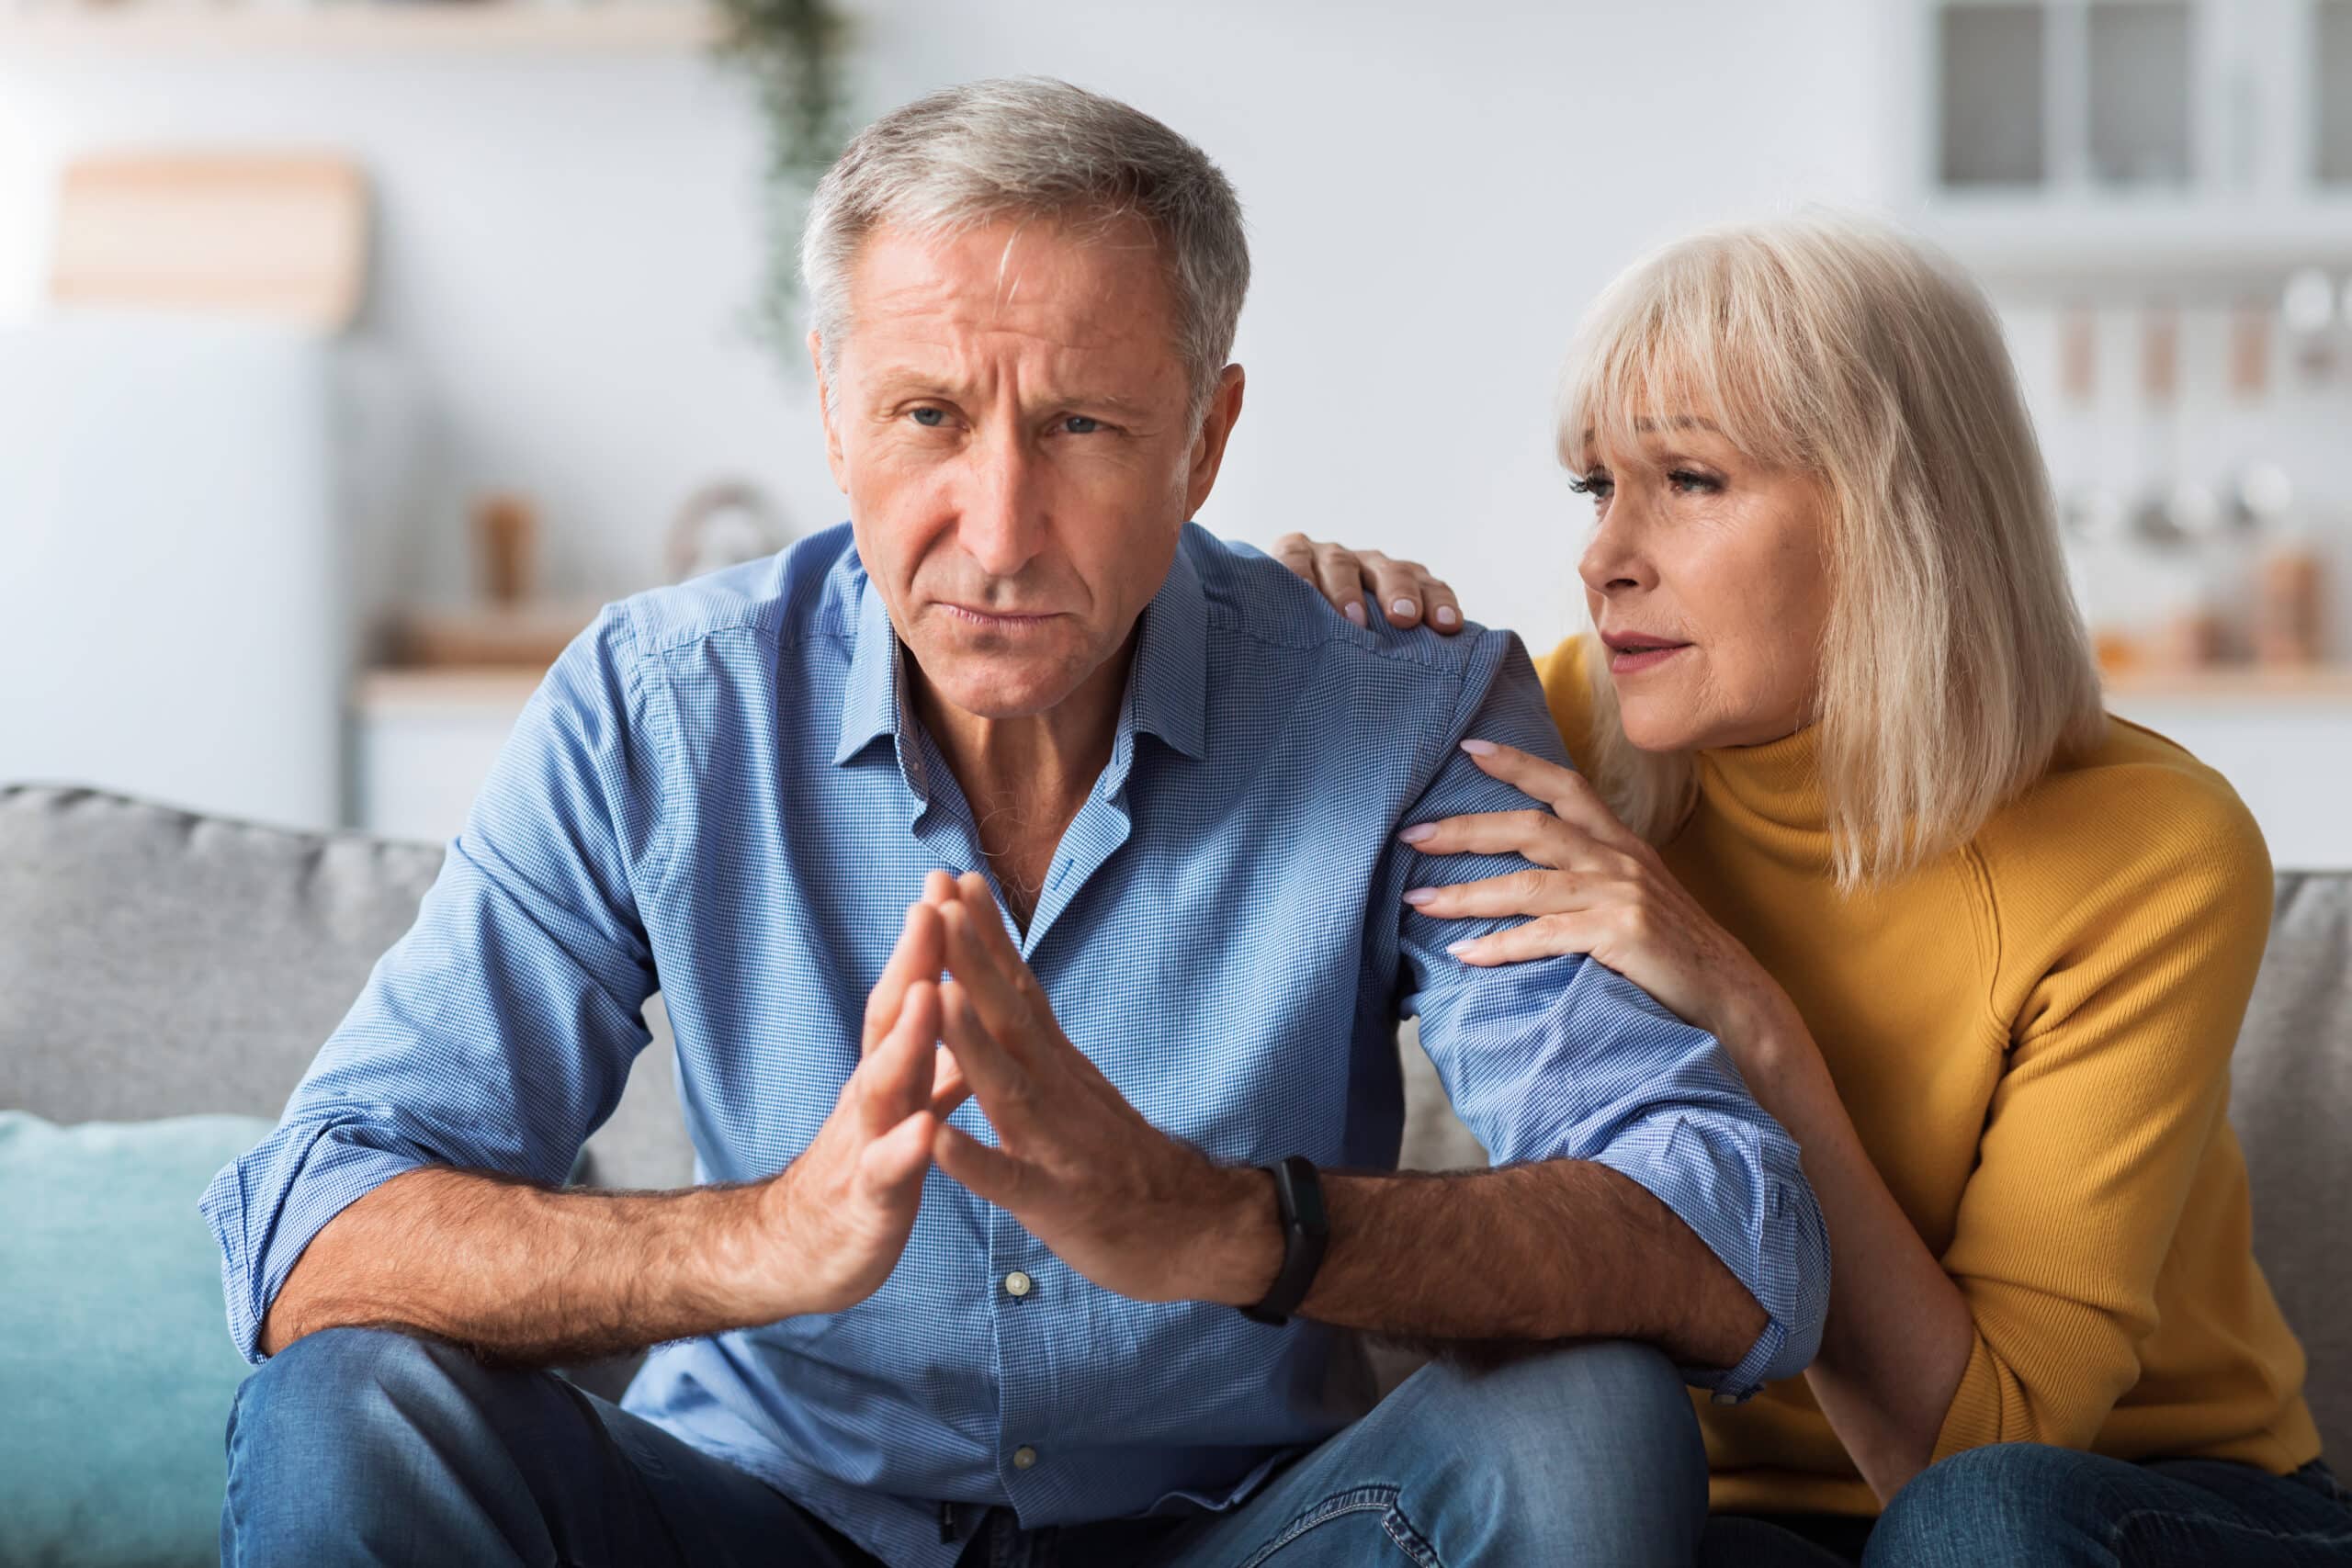 Worried Senior Wife Talking To Concerned Husband Hugging Him, Having Problems In Married Life Sitting On Couch At Home. Woman Comforting And Supporting Man During Crisis Indoor